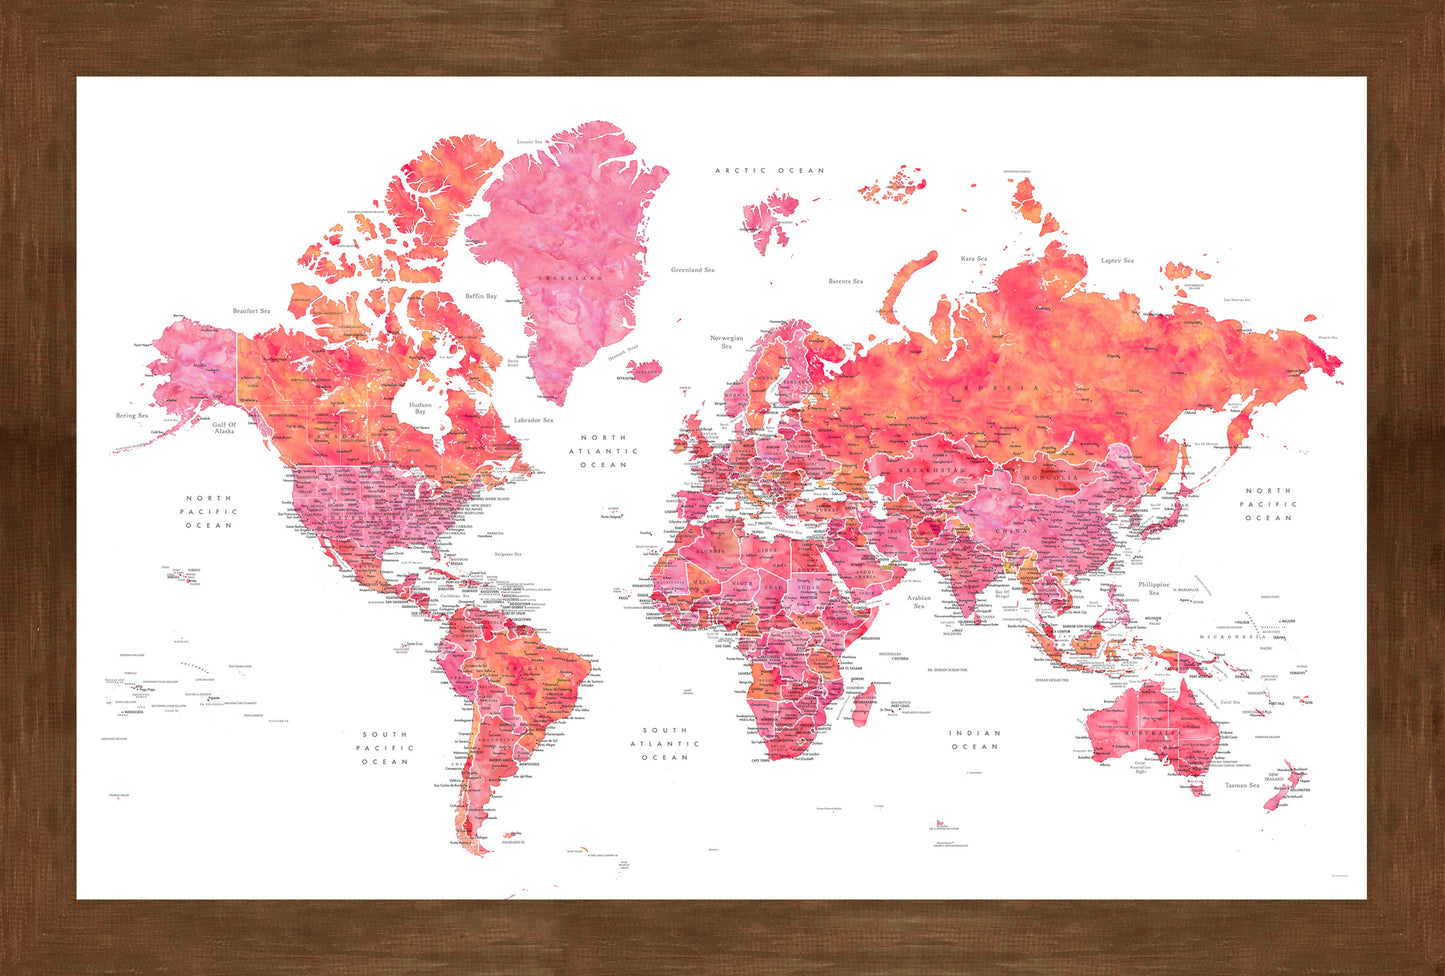 XL Framed Magnetic Travel Map - Red Sun